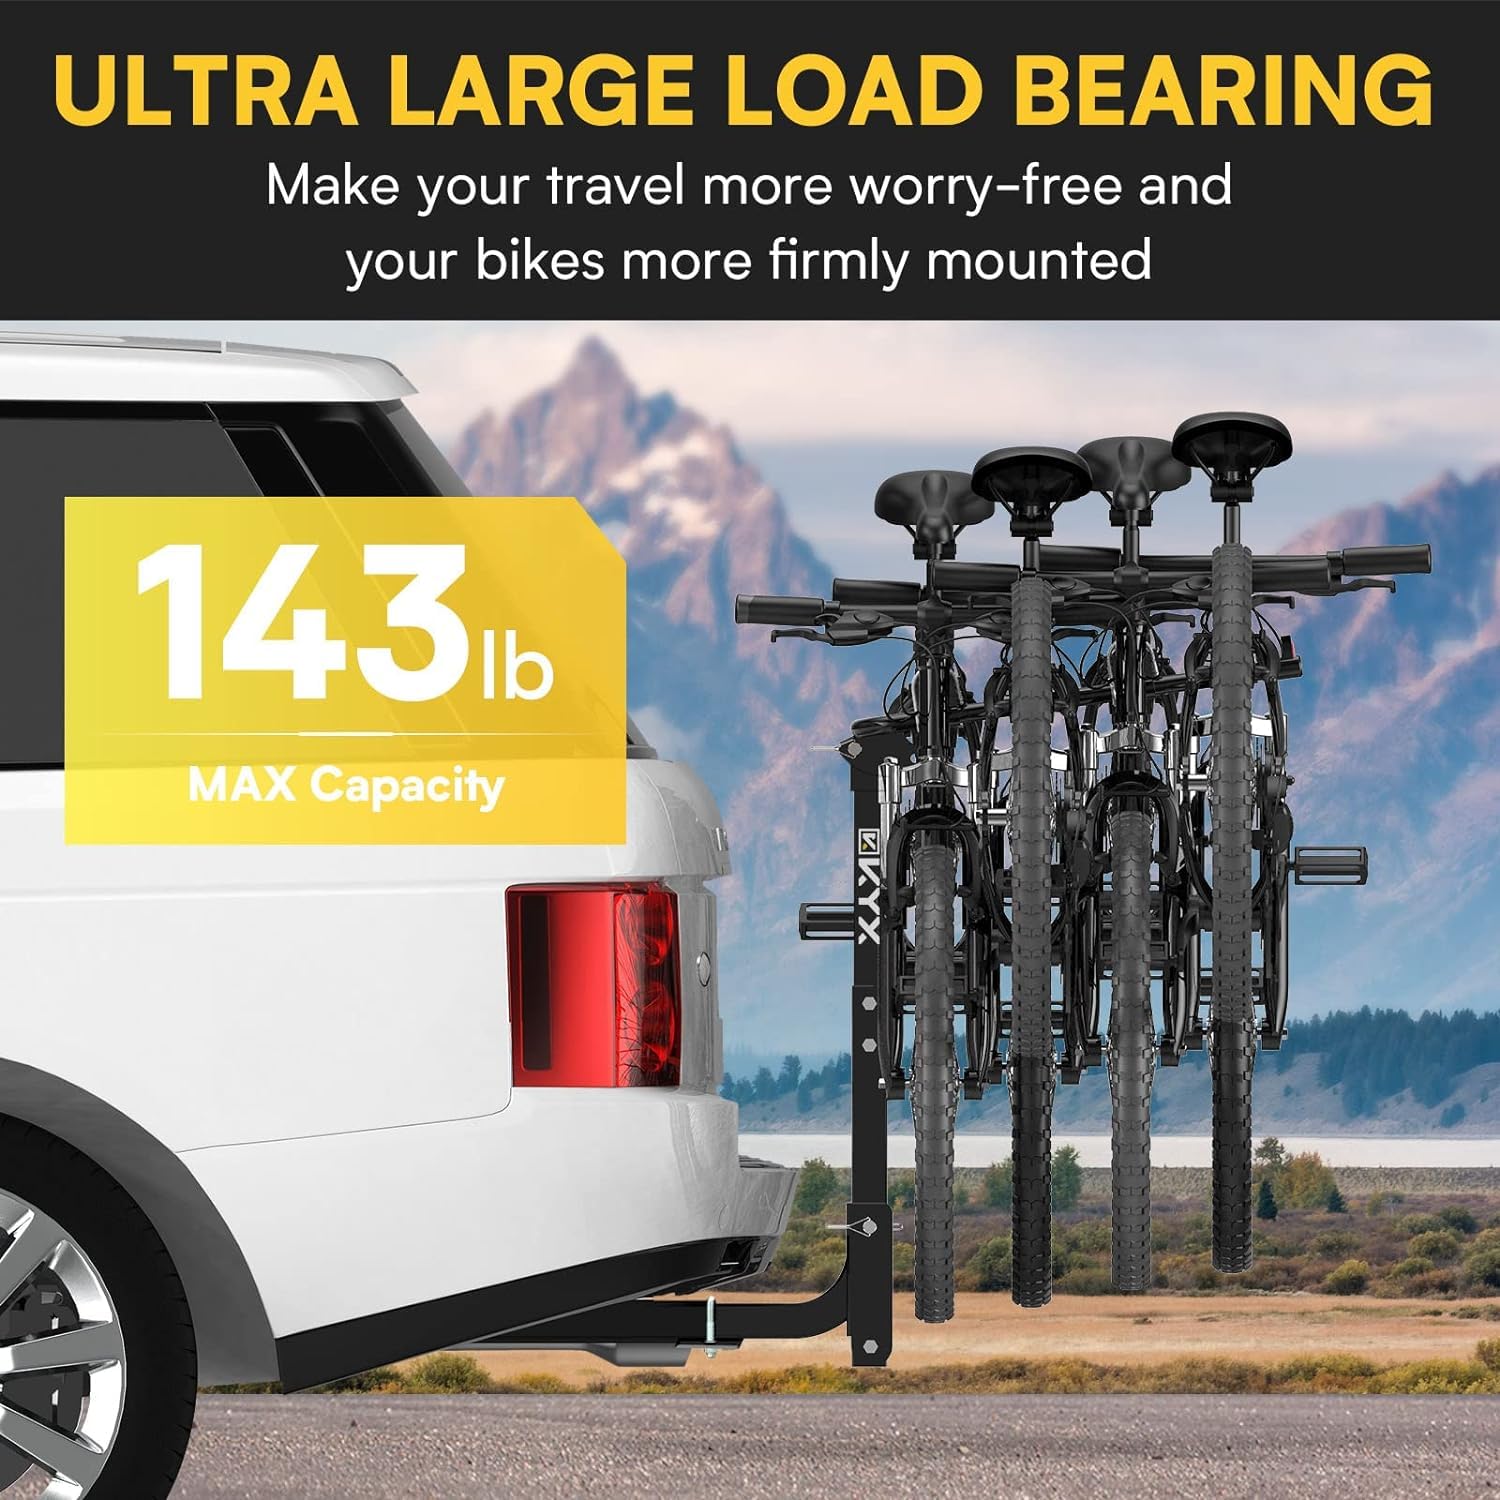 KYX Bike Rack Hitch Mount 4 Bikes, Bike Rack for Car, SUV, RV Up to 143 lbs Load, Bicycle Car Racks Carrier with No-Wobble Bolt and Lock Straps, Tilt Release, Easy Assemble Bike Rack for 2'' Receiver